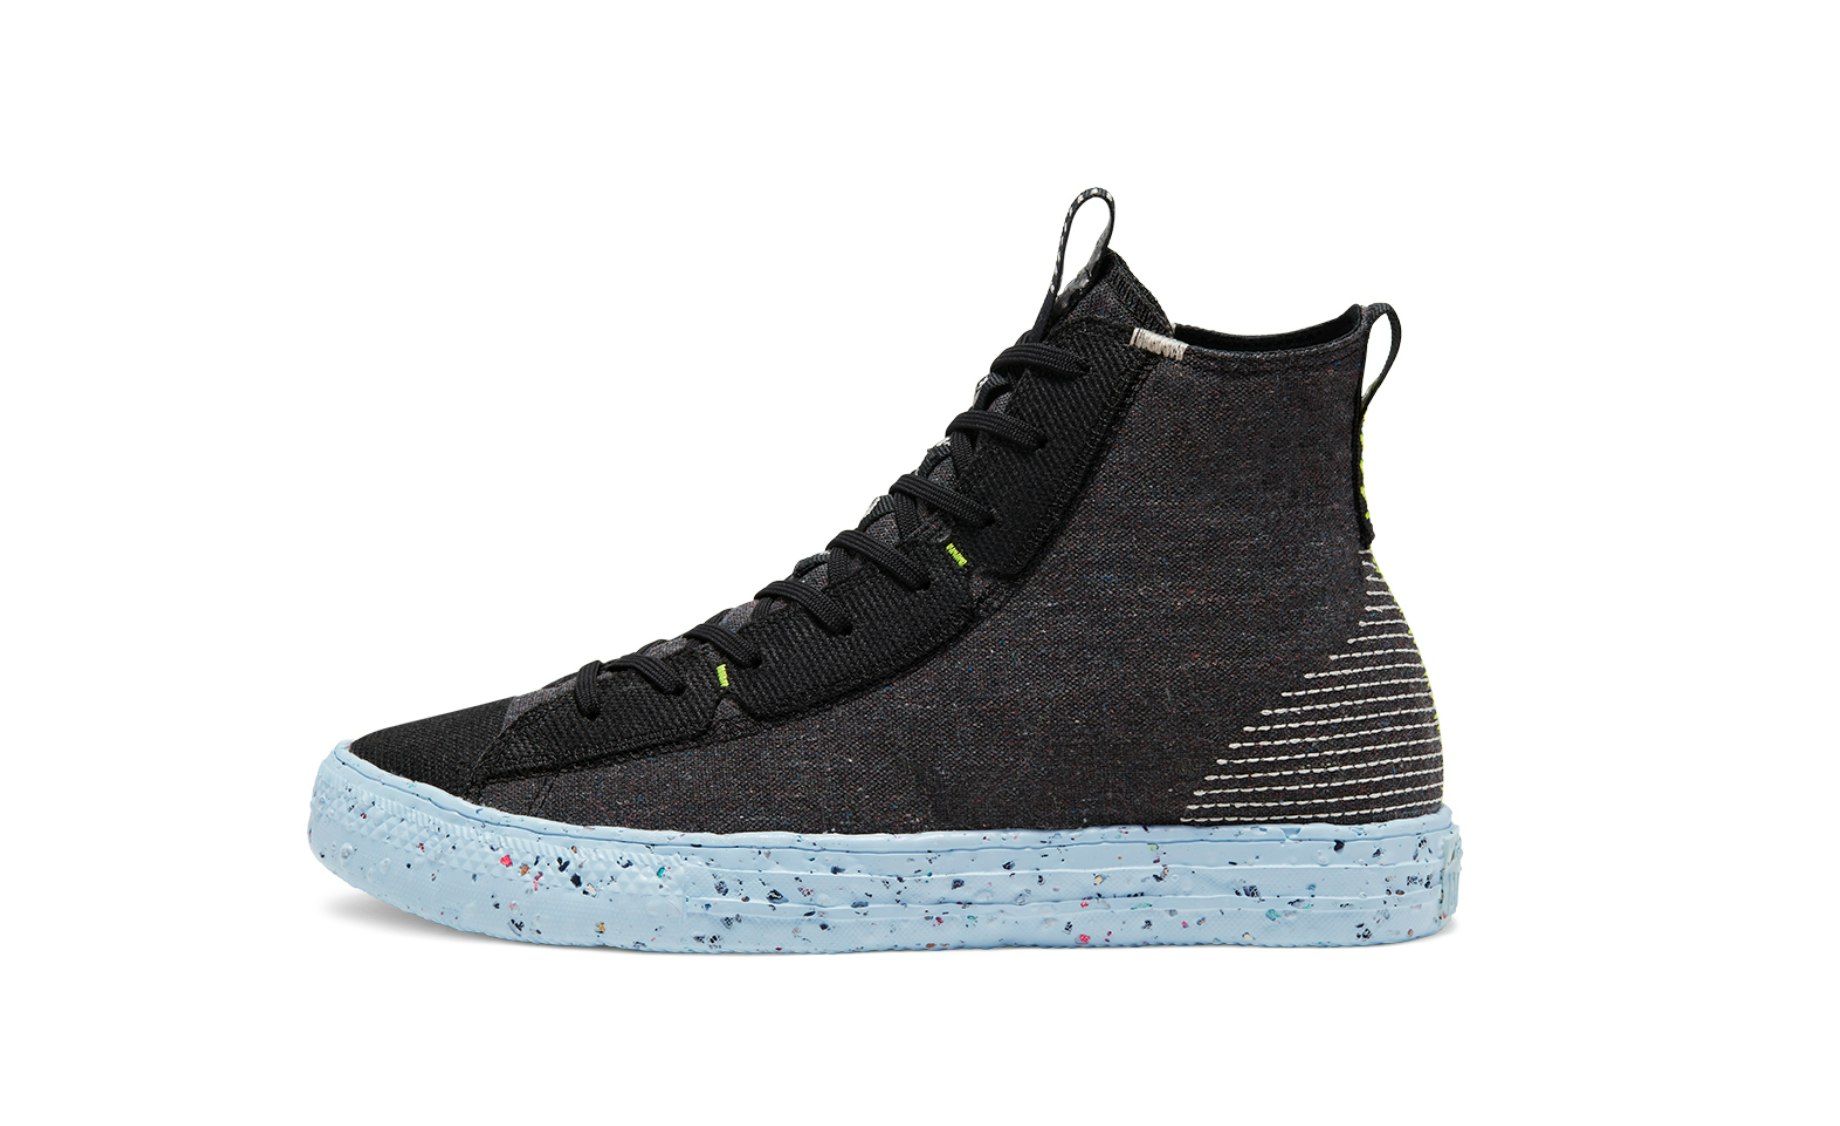 Converse Chuck Taylor All Star Crater High Top (Black)